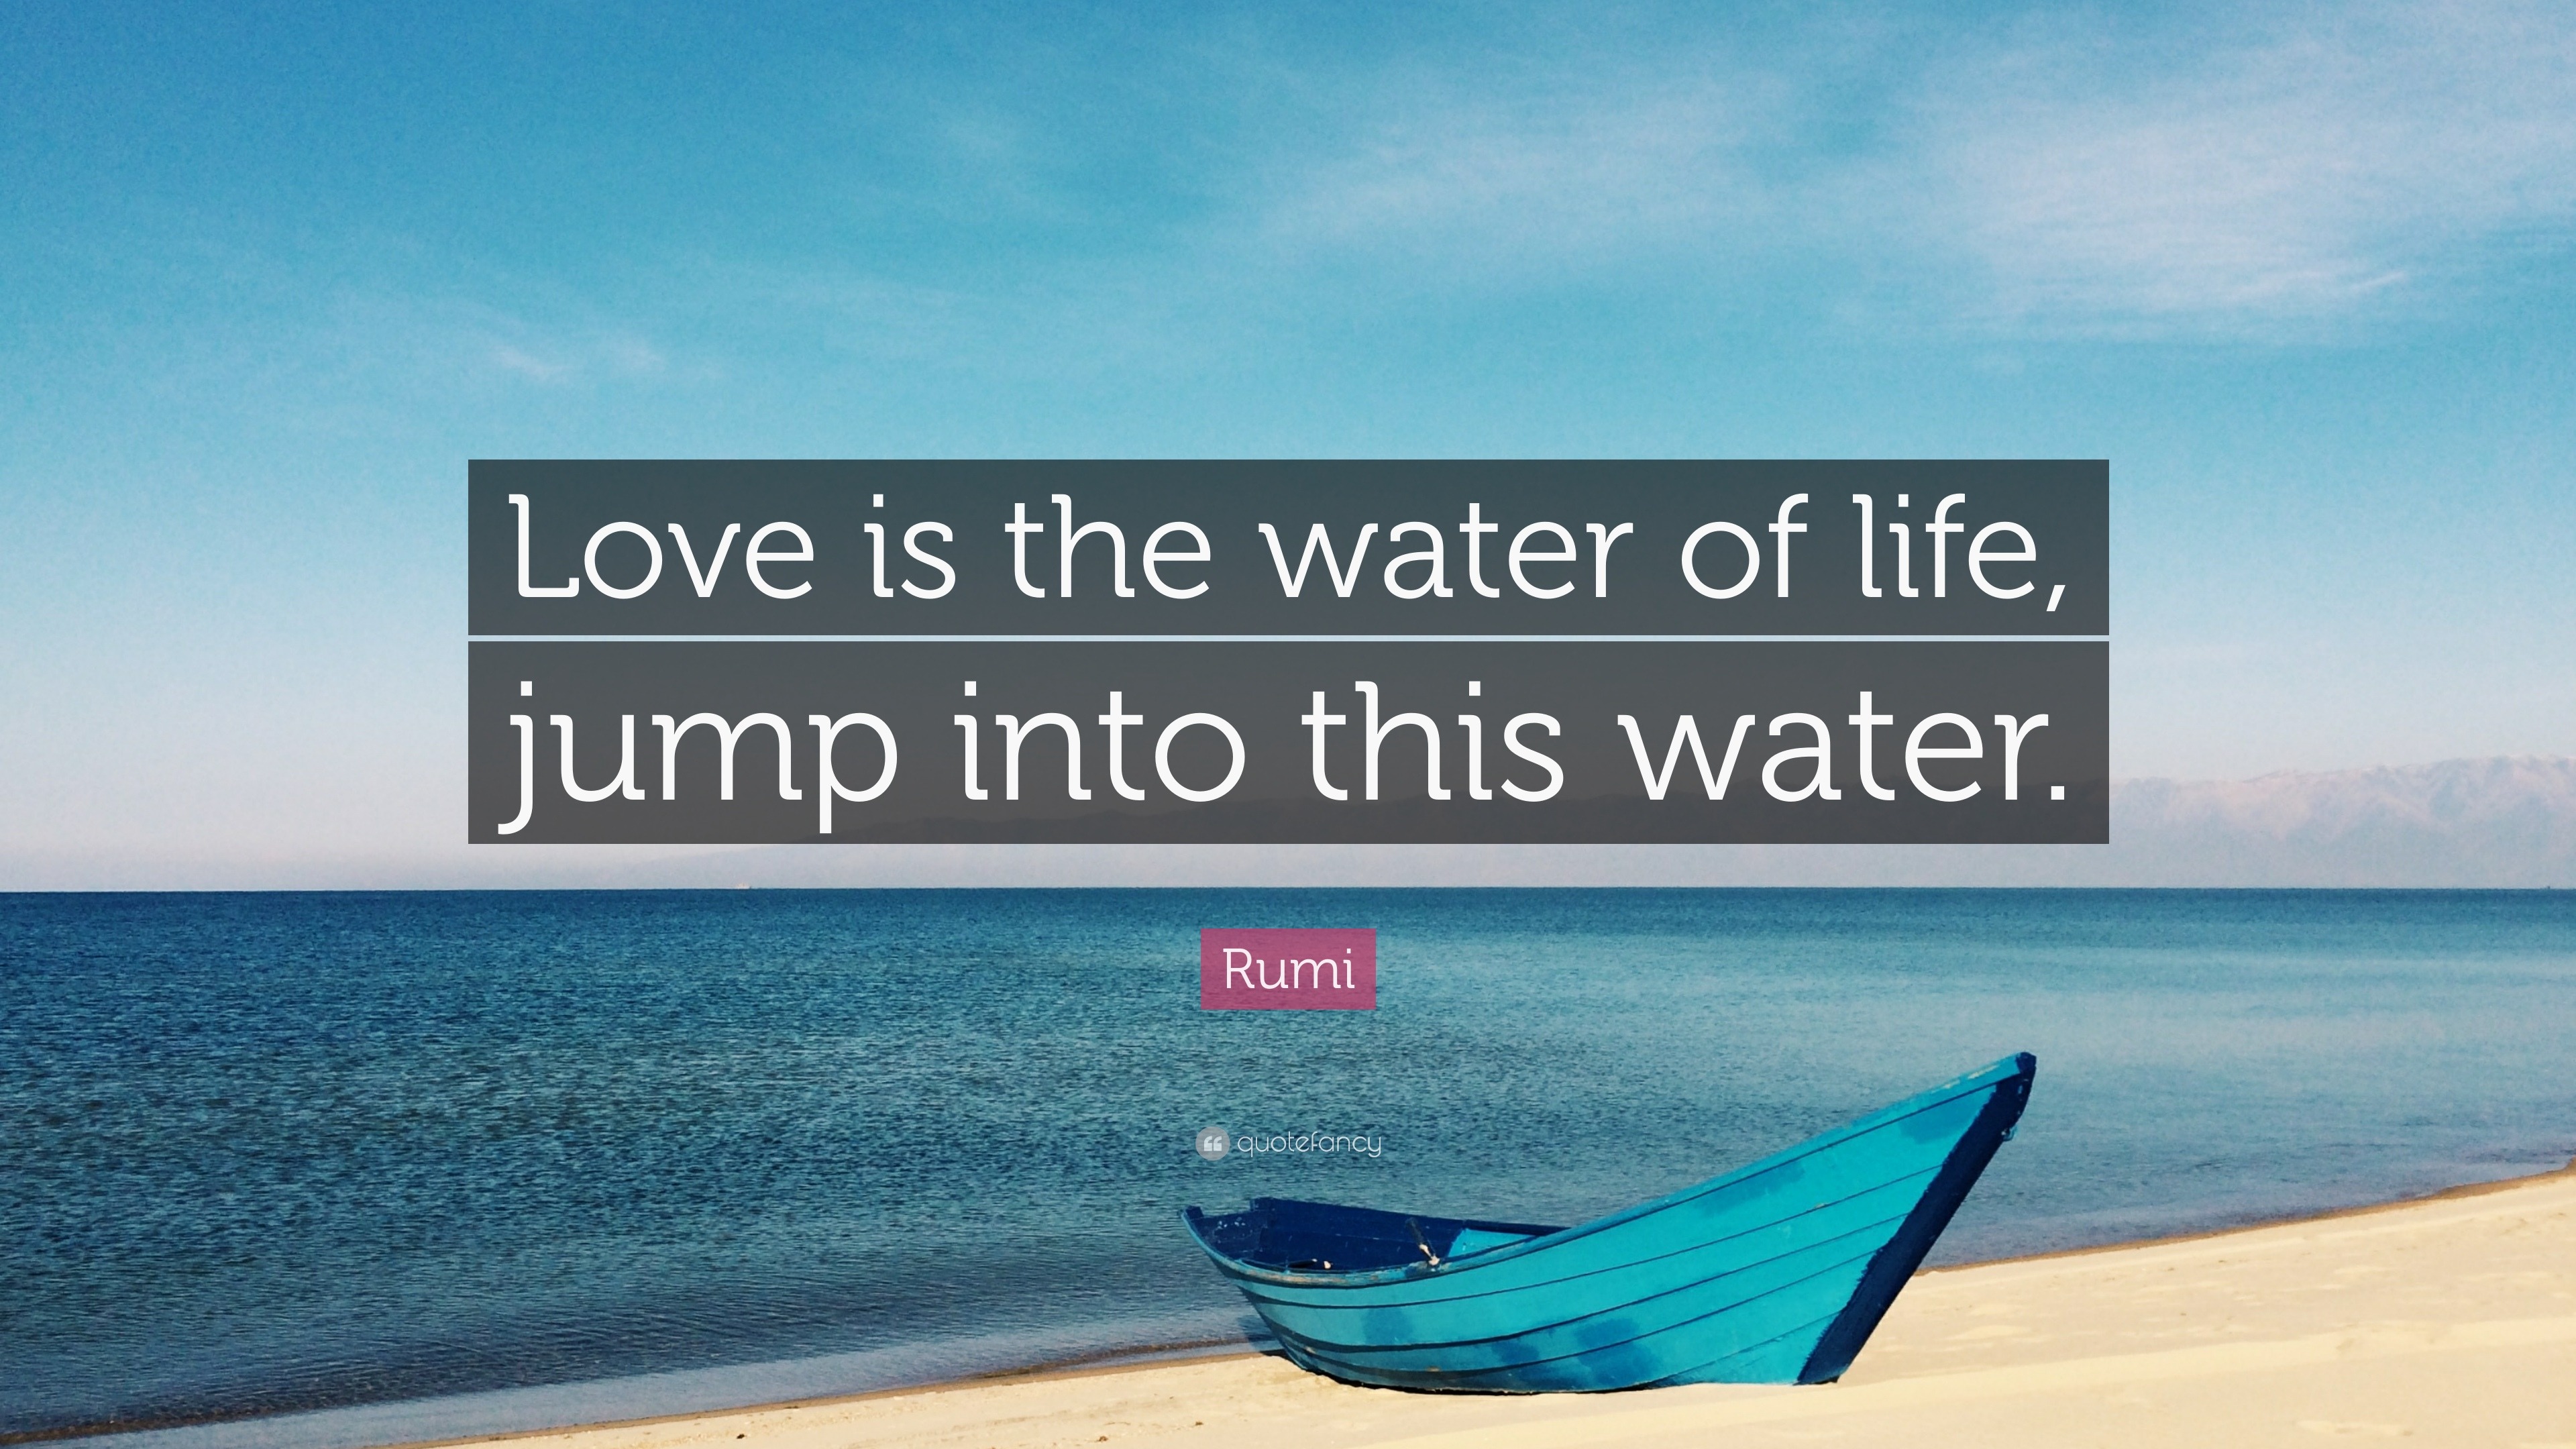 Rumi Quote “Love is the water of life jump into this water